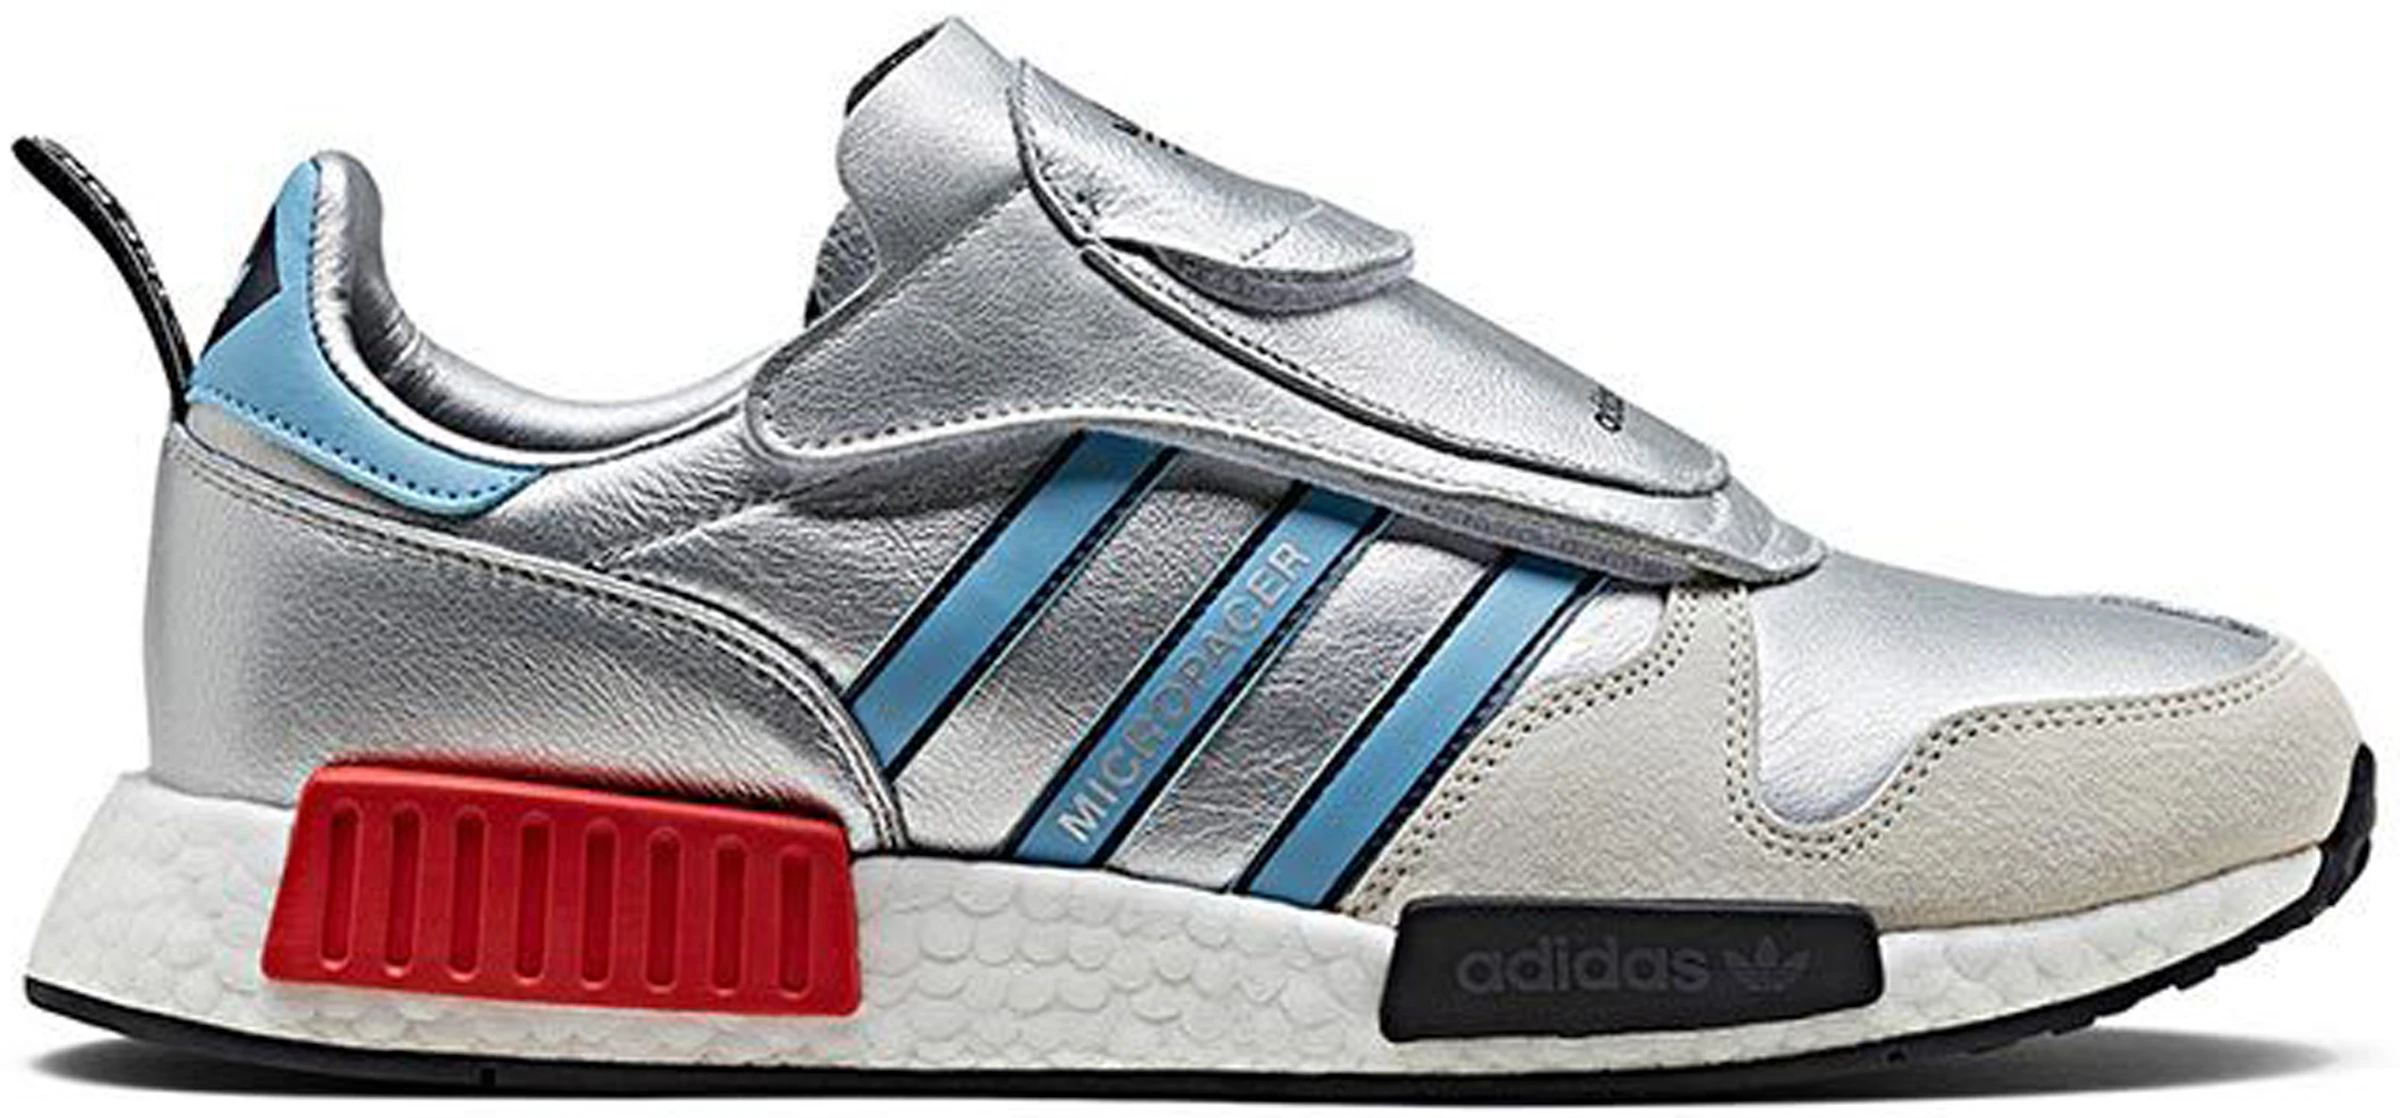 adidas Micropacer X Never - G26778 - ES